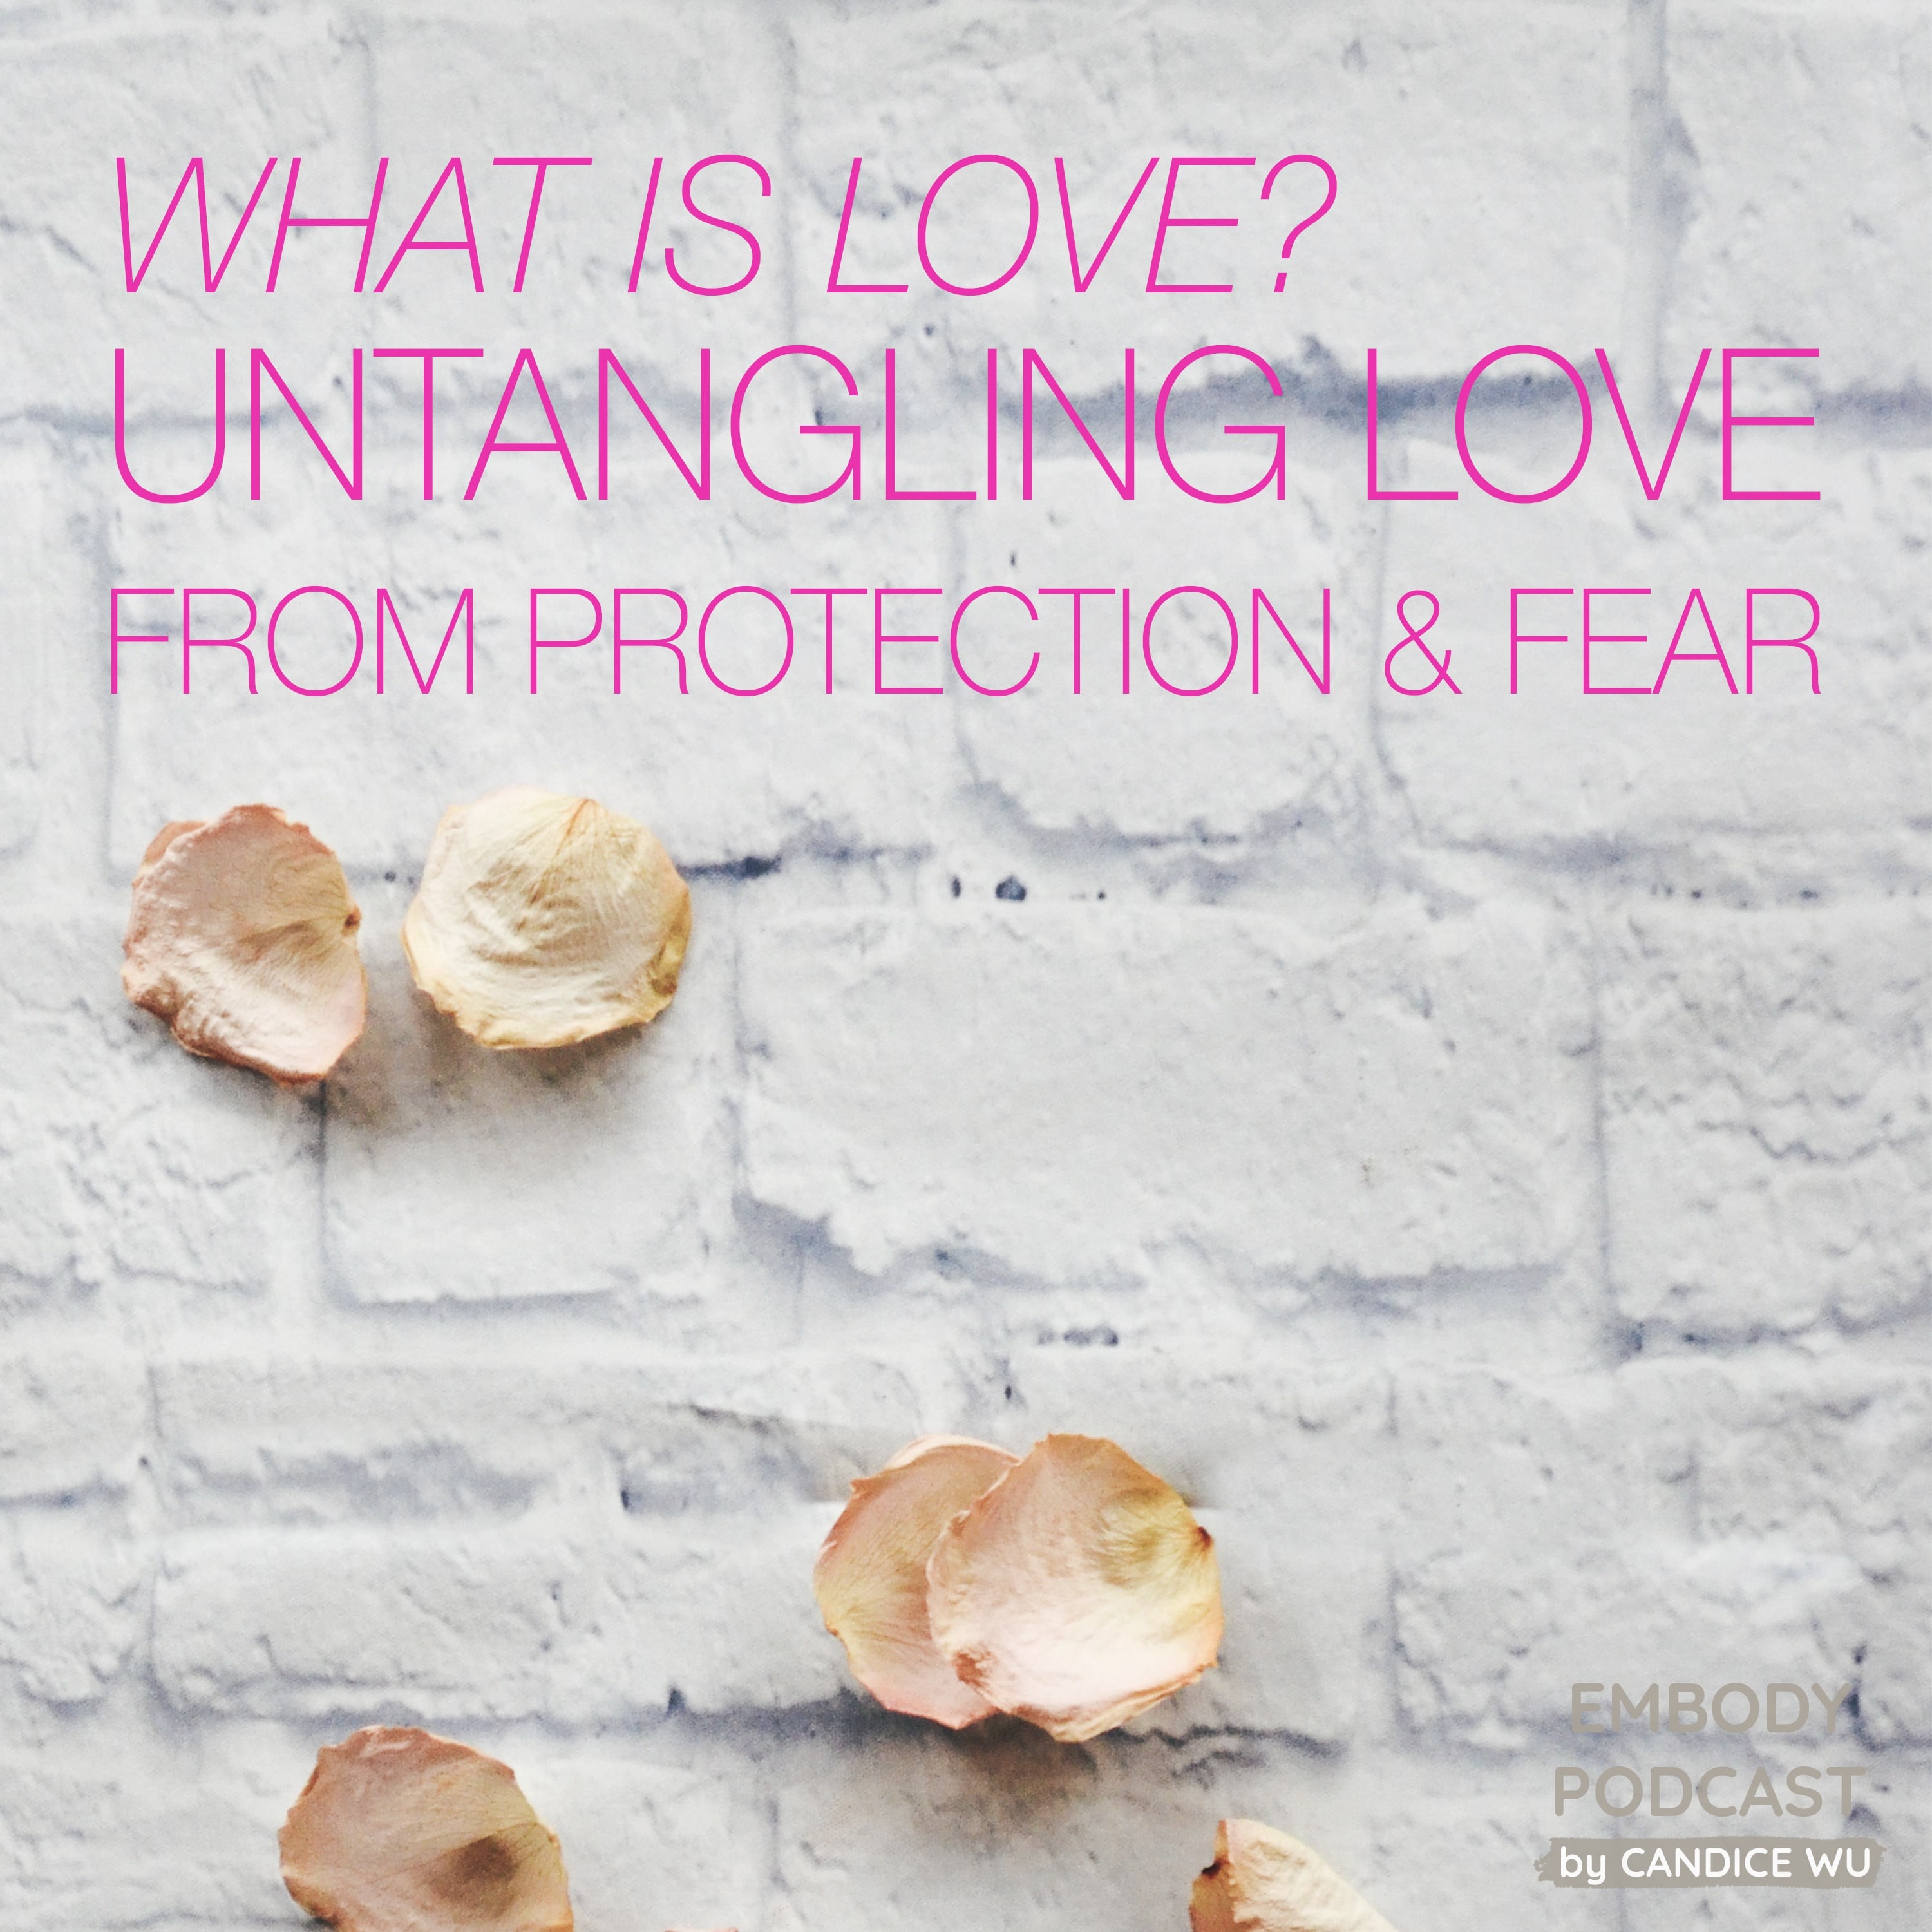 63: What is Love? Untangling Love from Protection & Fear